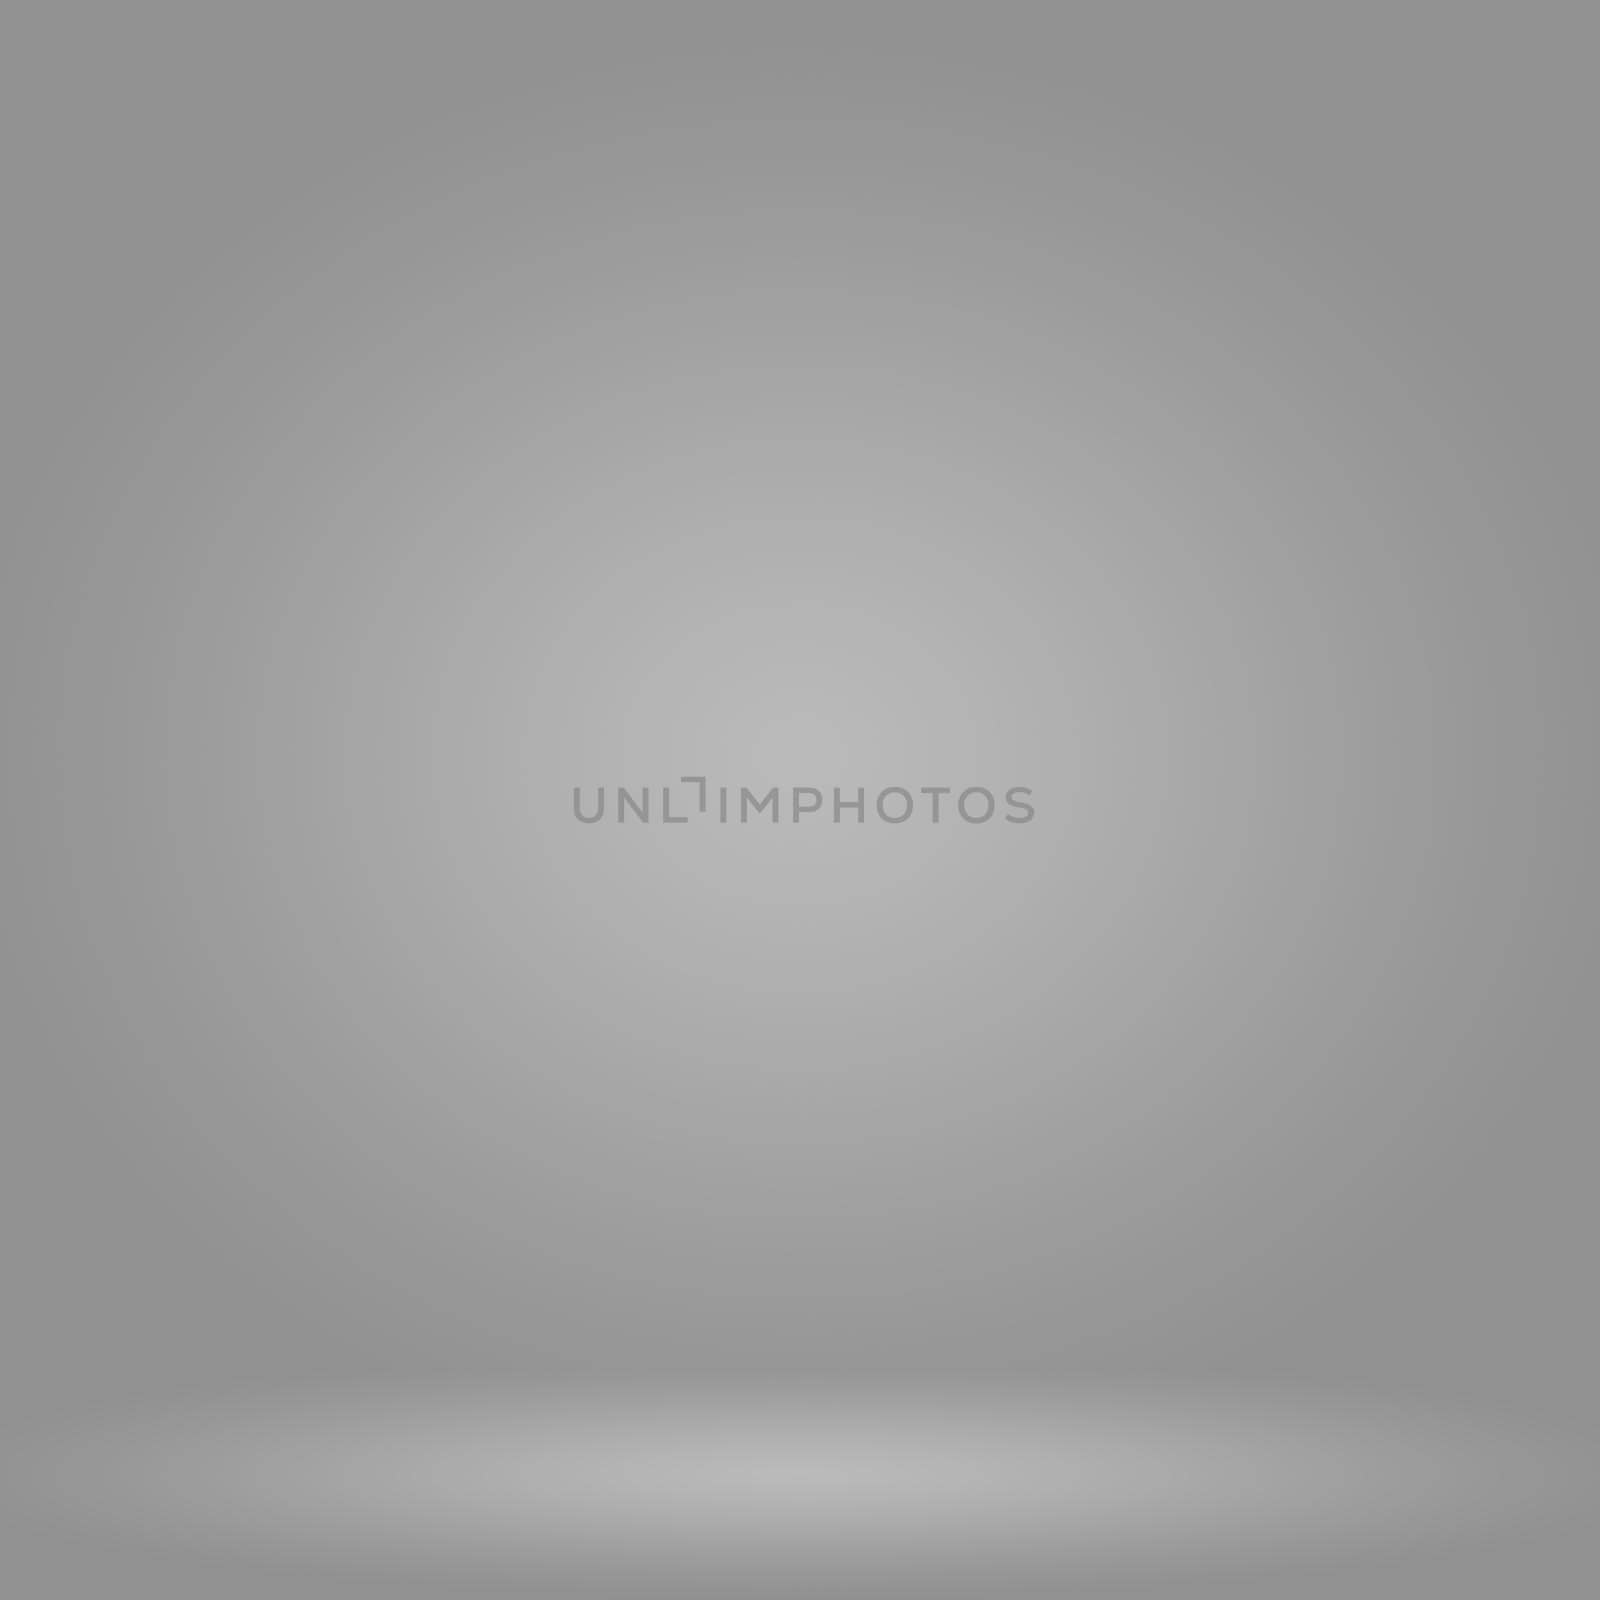 Abstract luxury blur Grey color gradient, used as background studio wall for display your products